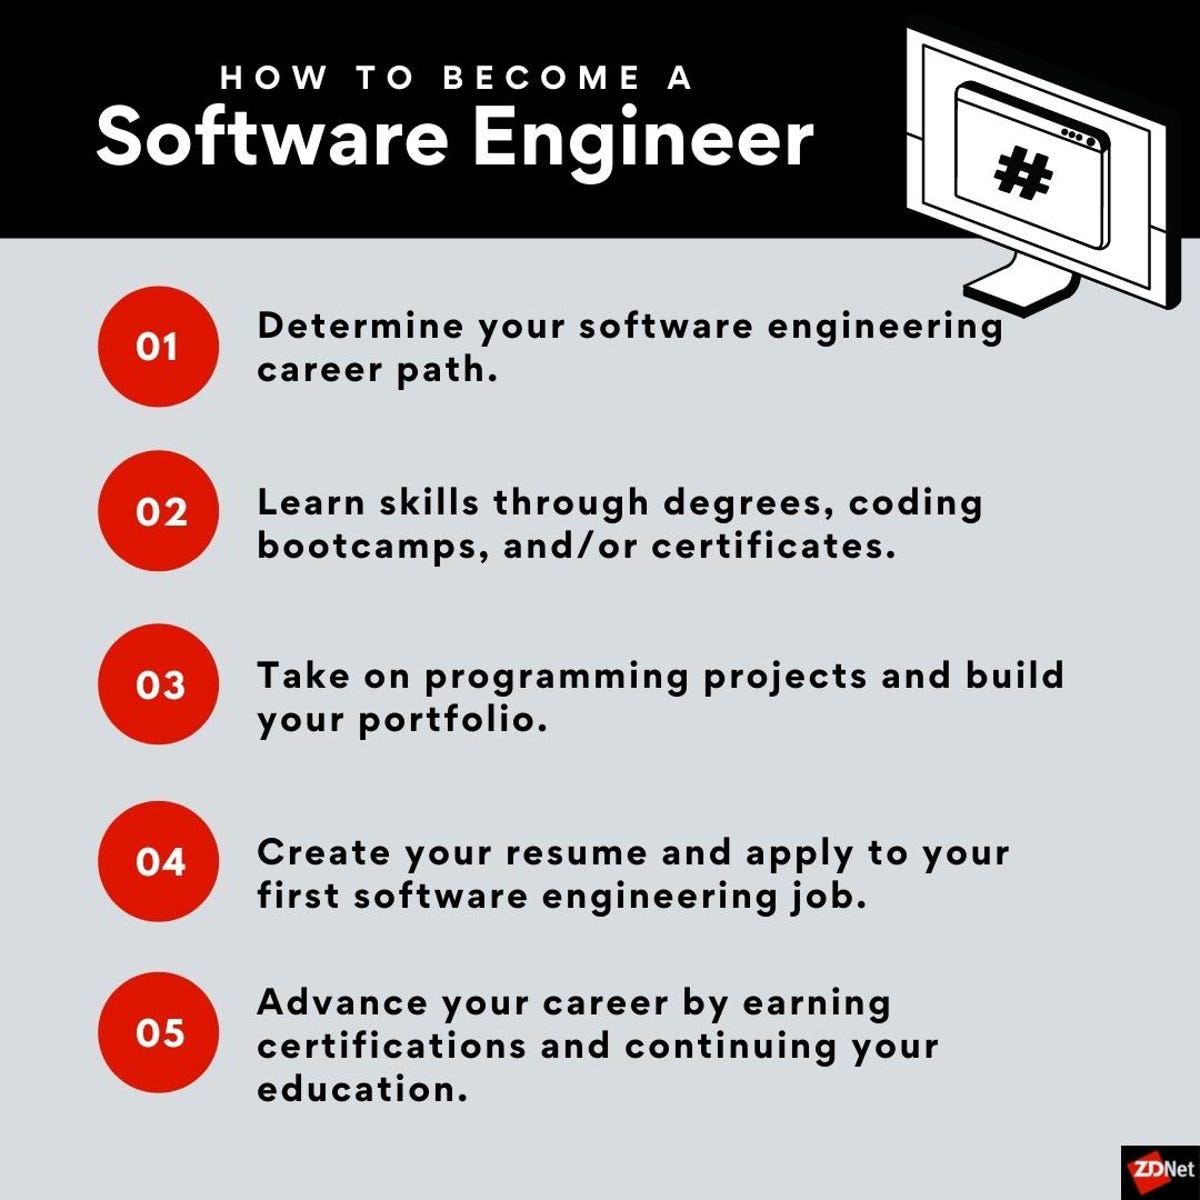 What are the roles and responsibilities of software developer